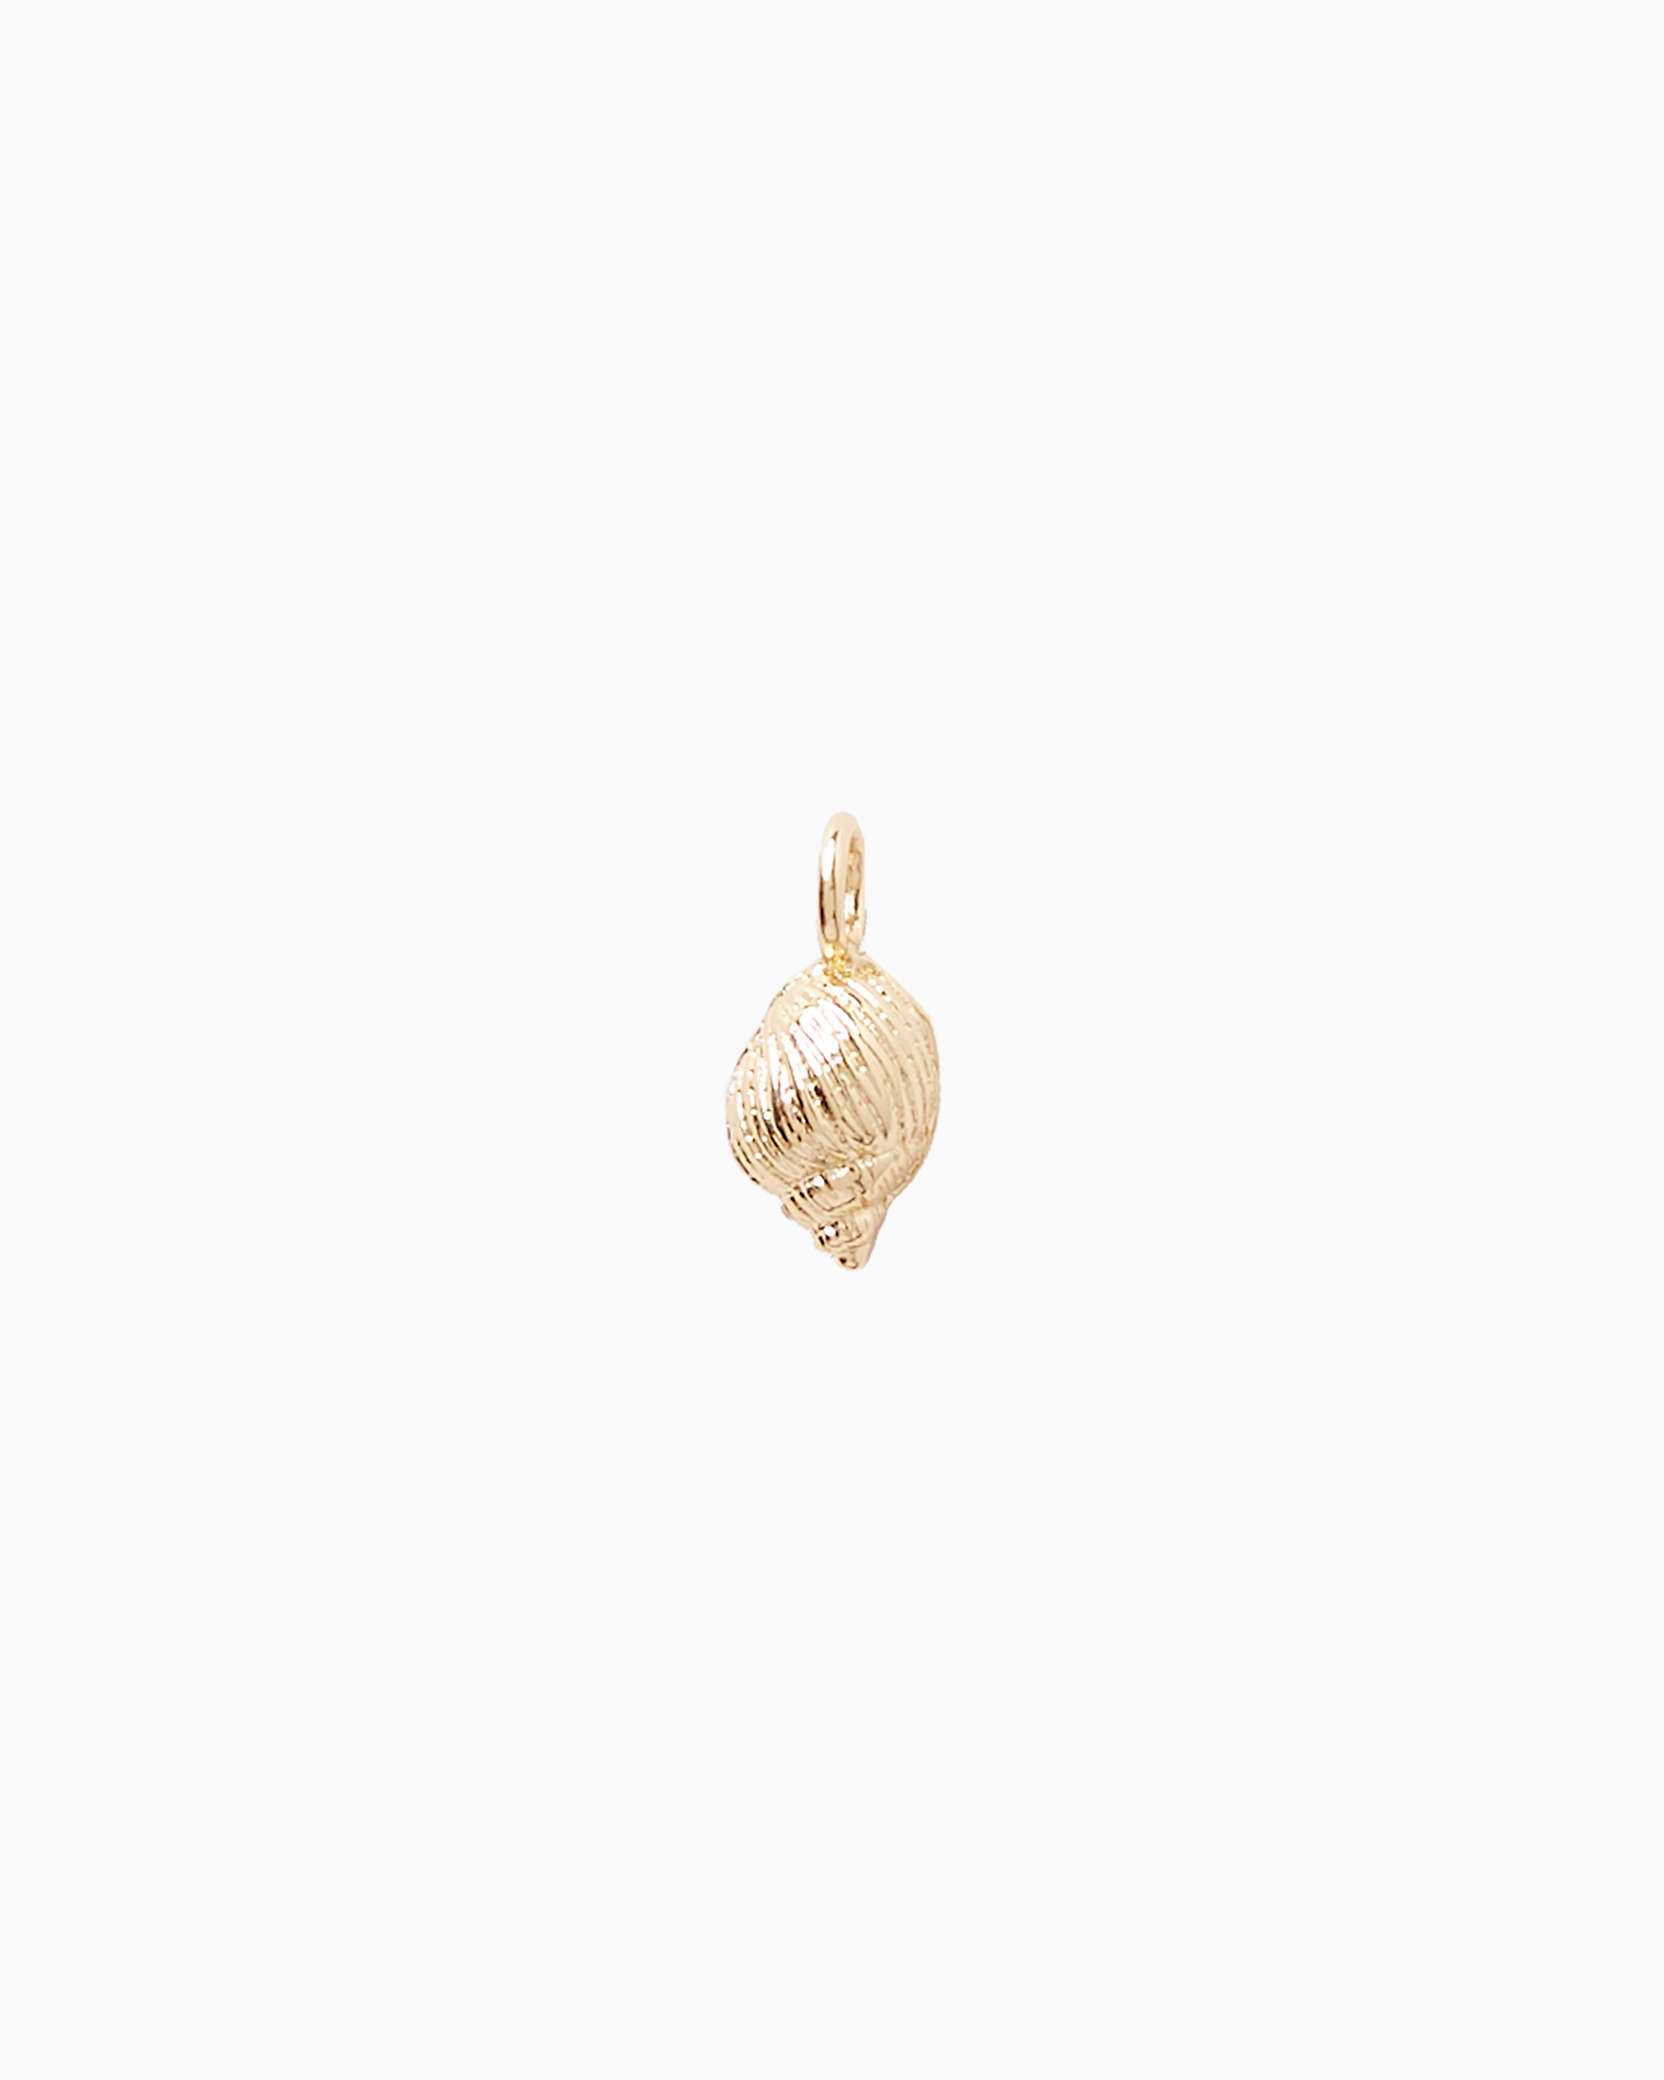 Lilly Pulitzer Small Custom Charm - Shell In Gold Metallic Small Shell Charm